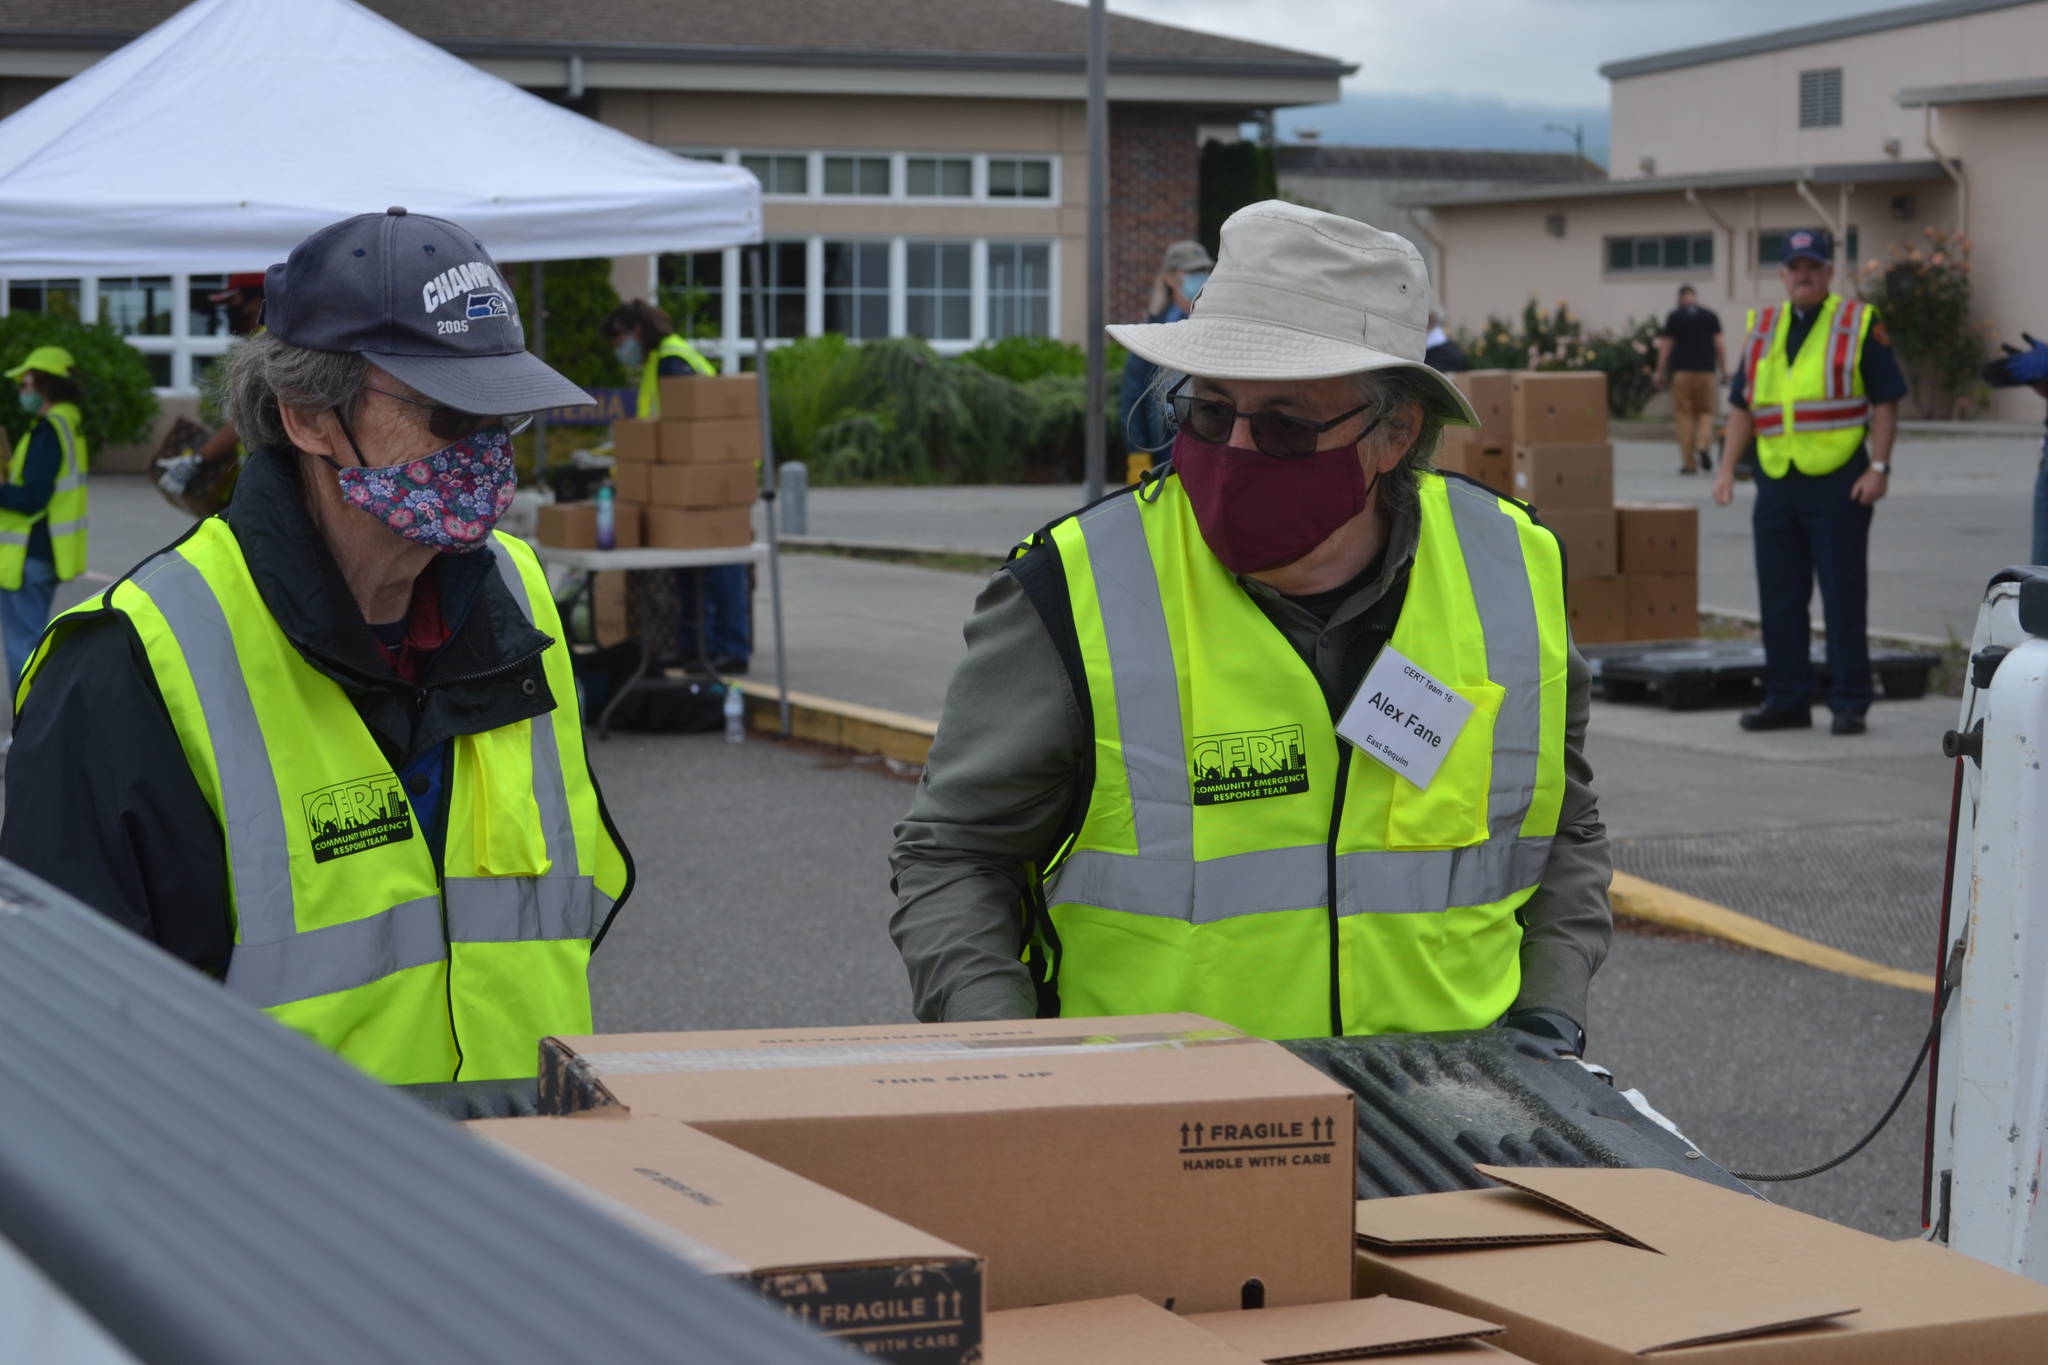 Volunteers Bruce Leigh and Alex Fane with Community Emergency Response Teams (CERT) put food boxes in a truck bed on June 10. The program, now held at Trinity United Methodist Church, continues twice monthly through December. Sequim Gazette file photo by Matthew Nash